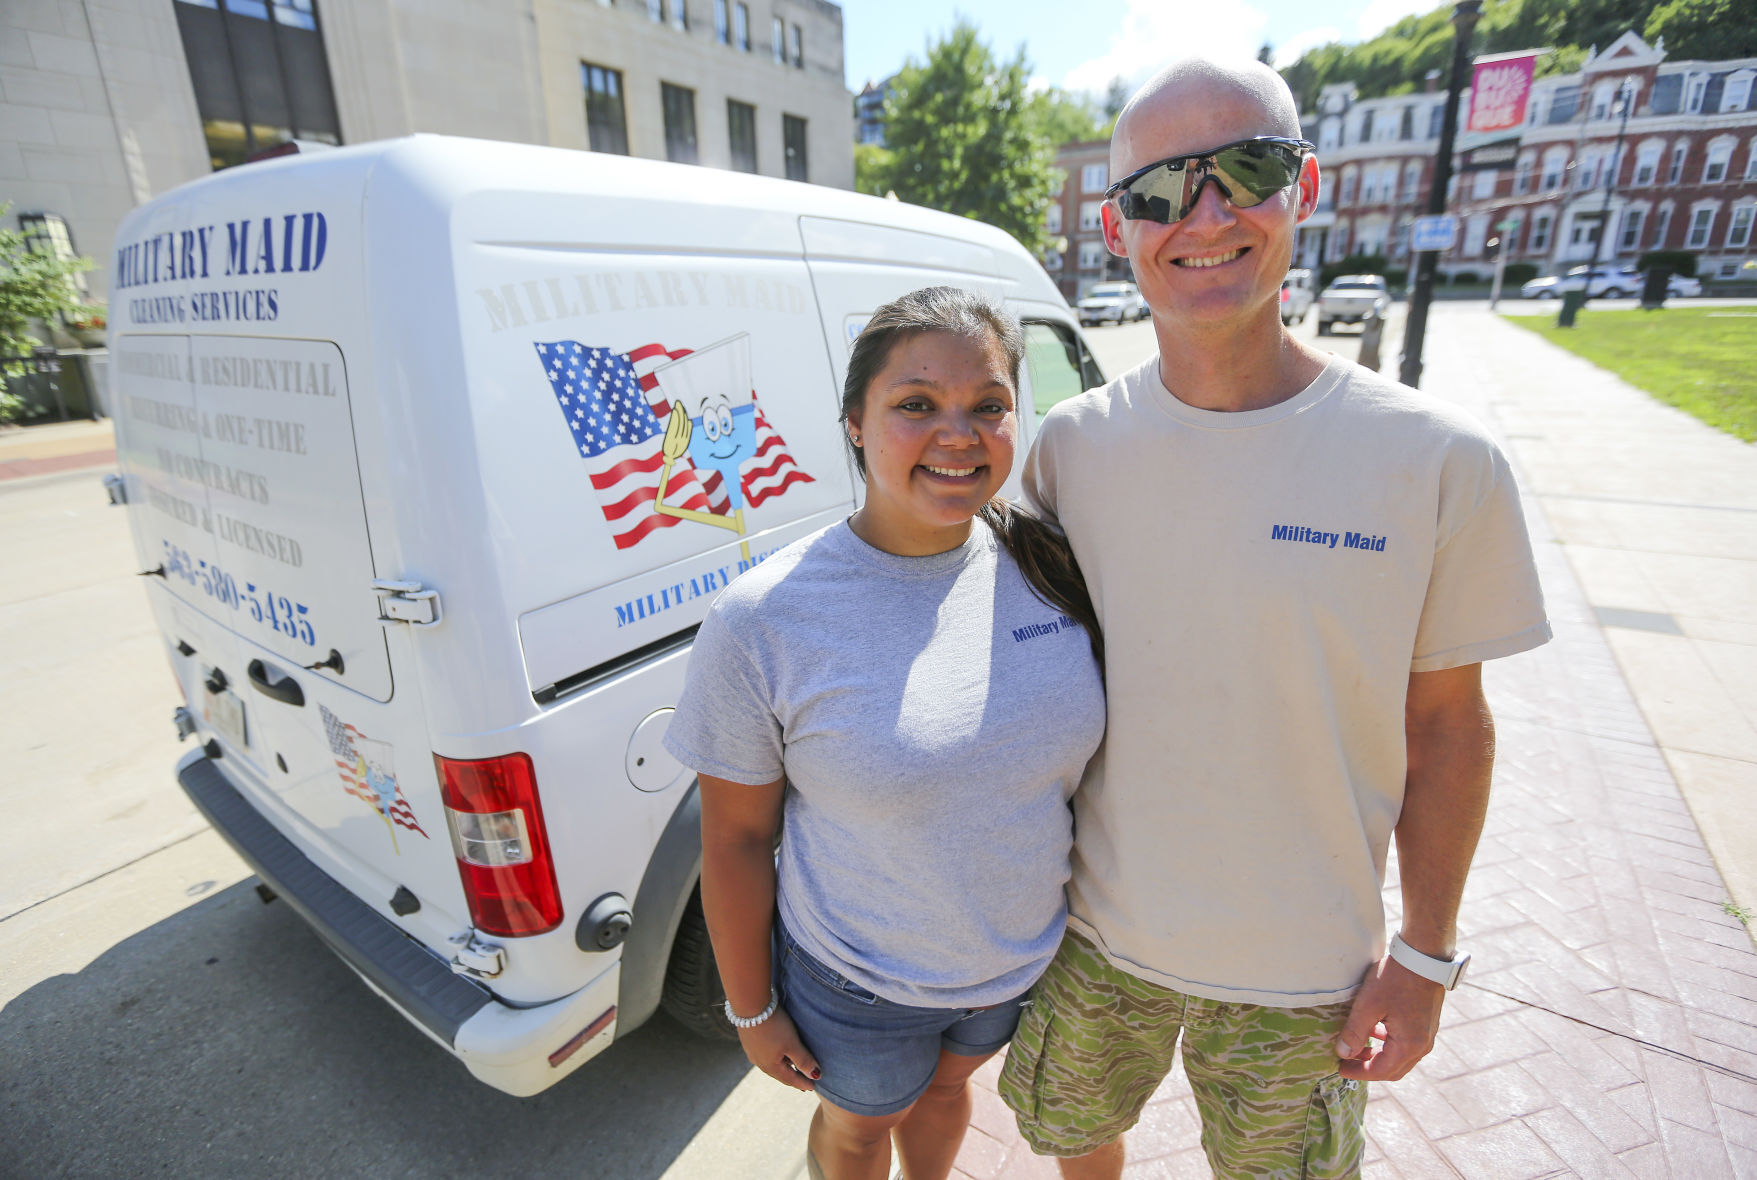 Justyn and Vanessa Husemann are the owners of Military Maid in Dubuque.    PHOTO CREDIT: Dave Kettering